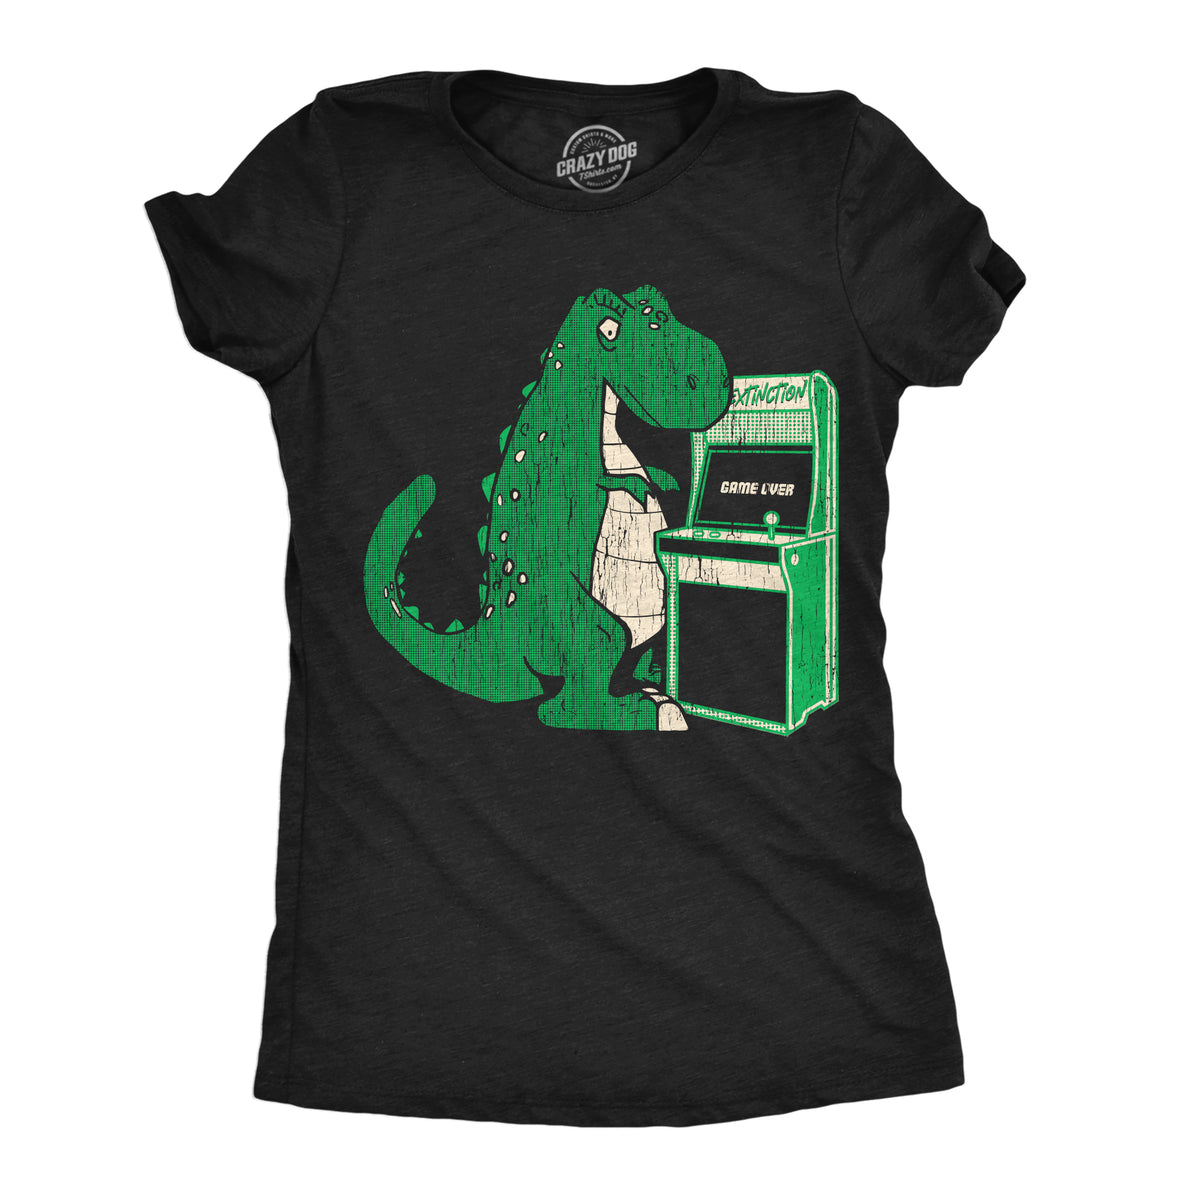 Funny Heather Black - Game Over T Rex Game Over T Rex Womens T Shirt Nerdy Video Games Dinosaur Tee